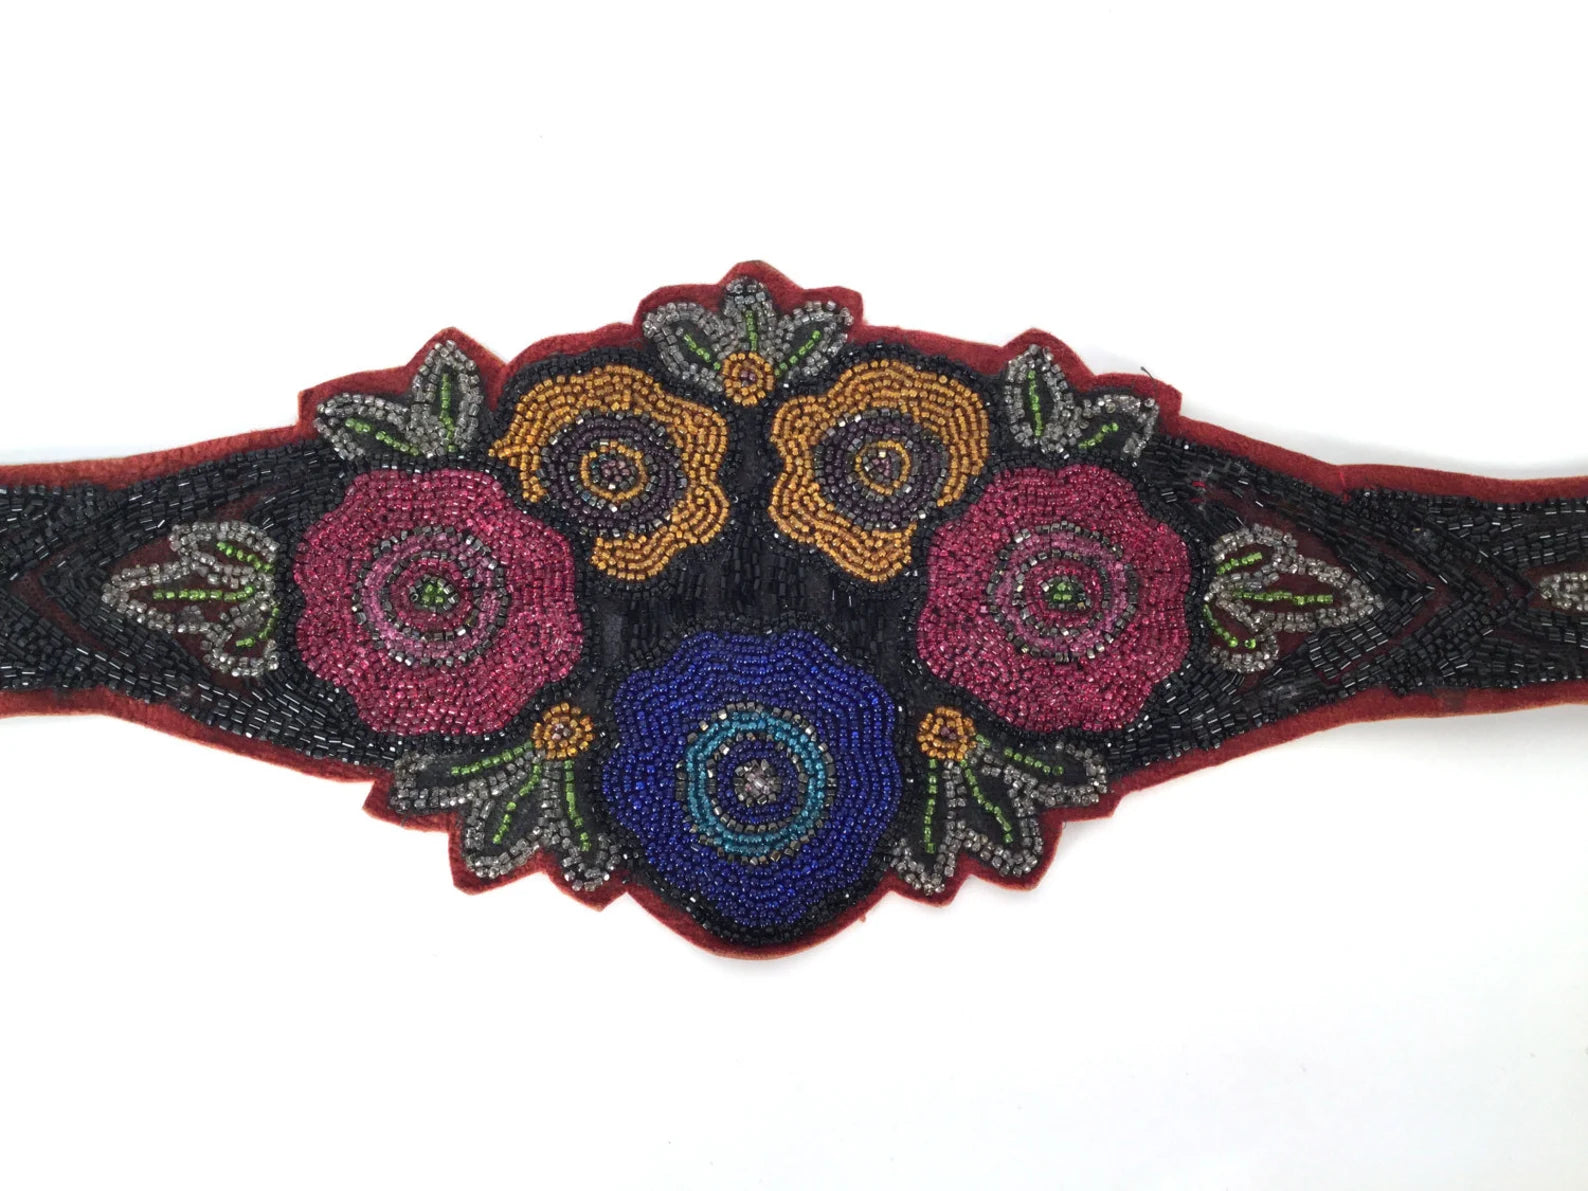 Vintage 1920s Womens Hand Beaded Floral Belt, Antique Art Deco Leather & Glass Bead, W25 